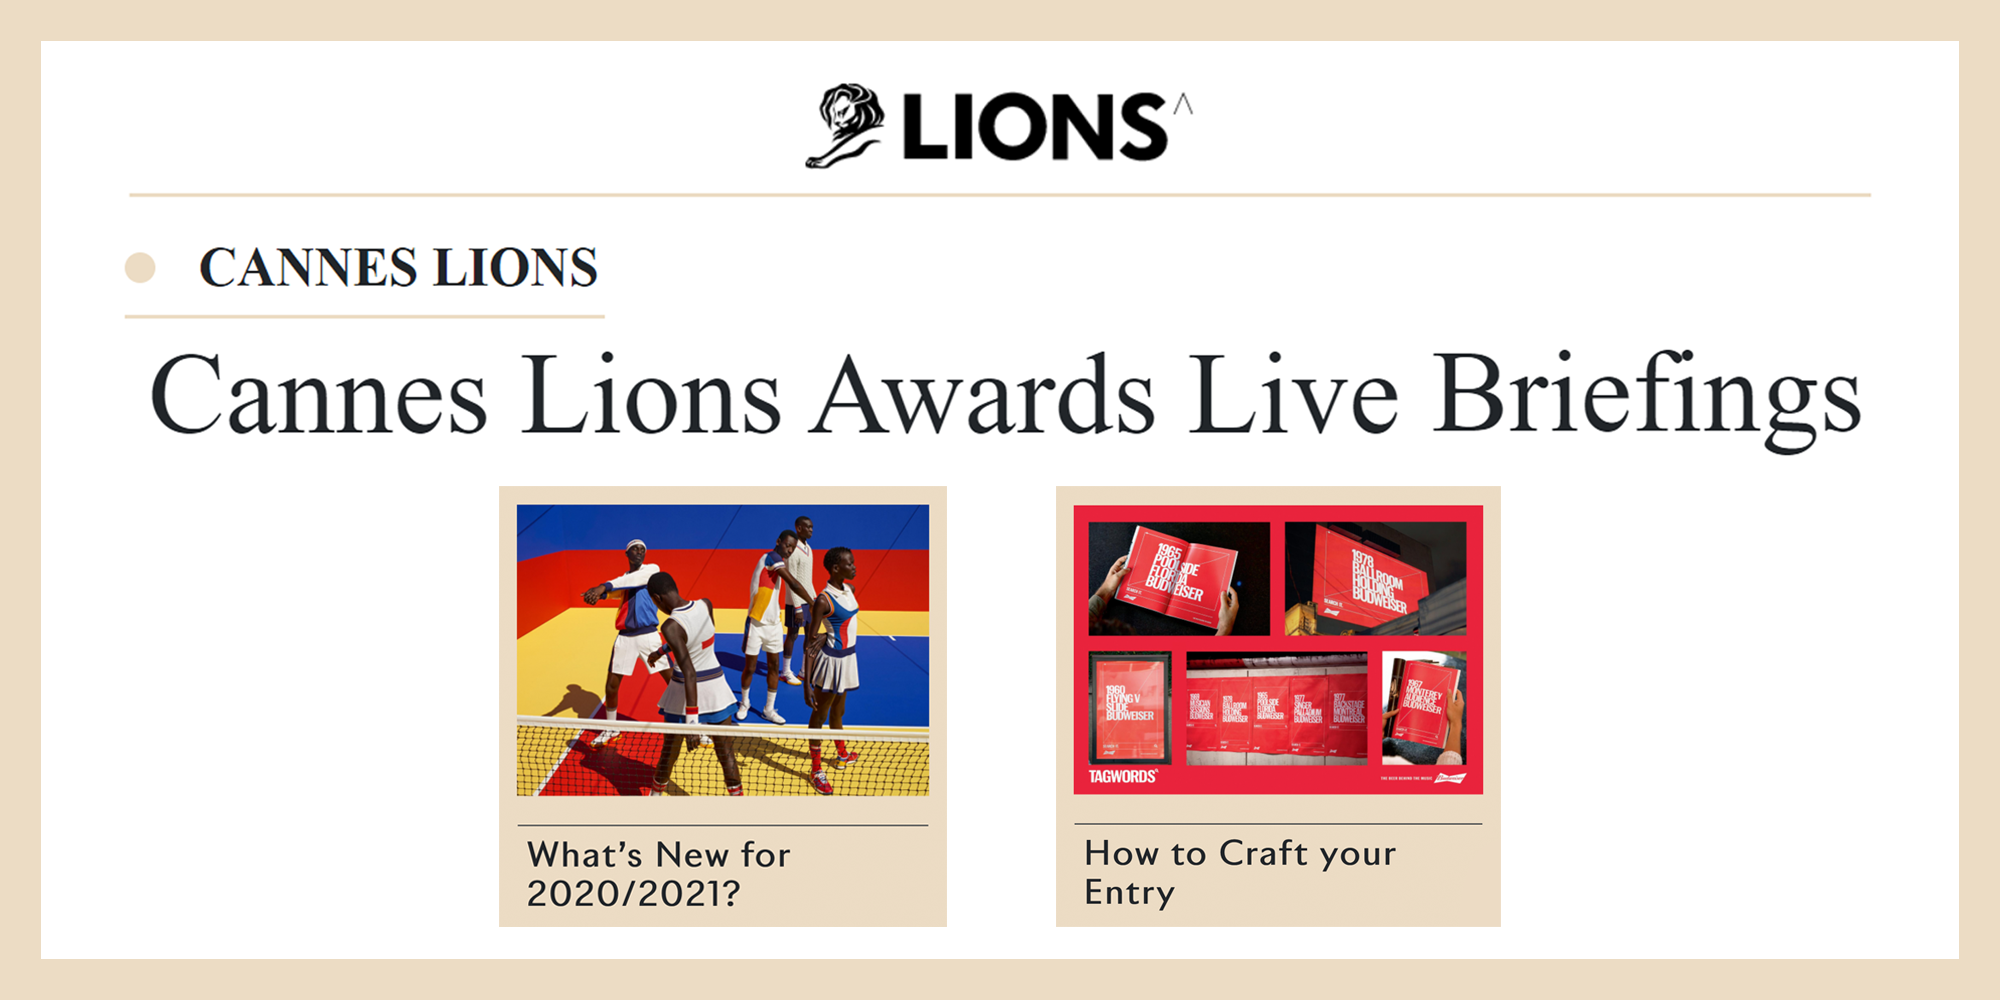 Cannes Lions Introduces Awards MiniSeries Live Briefings